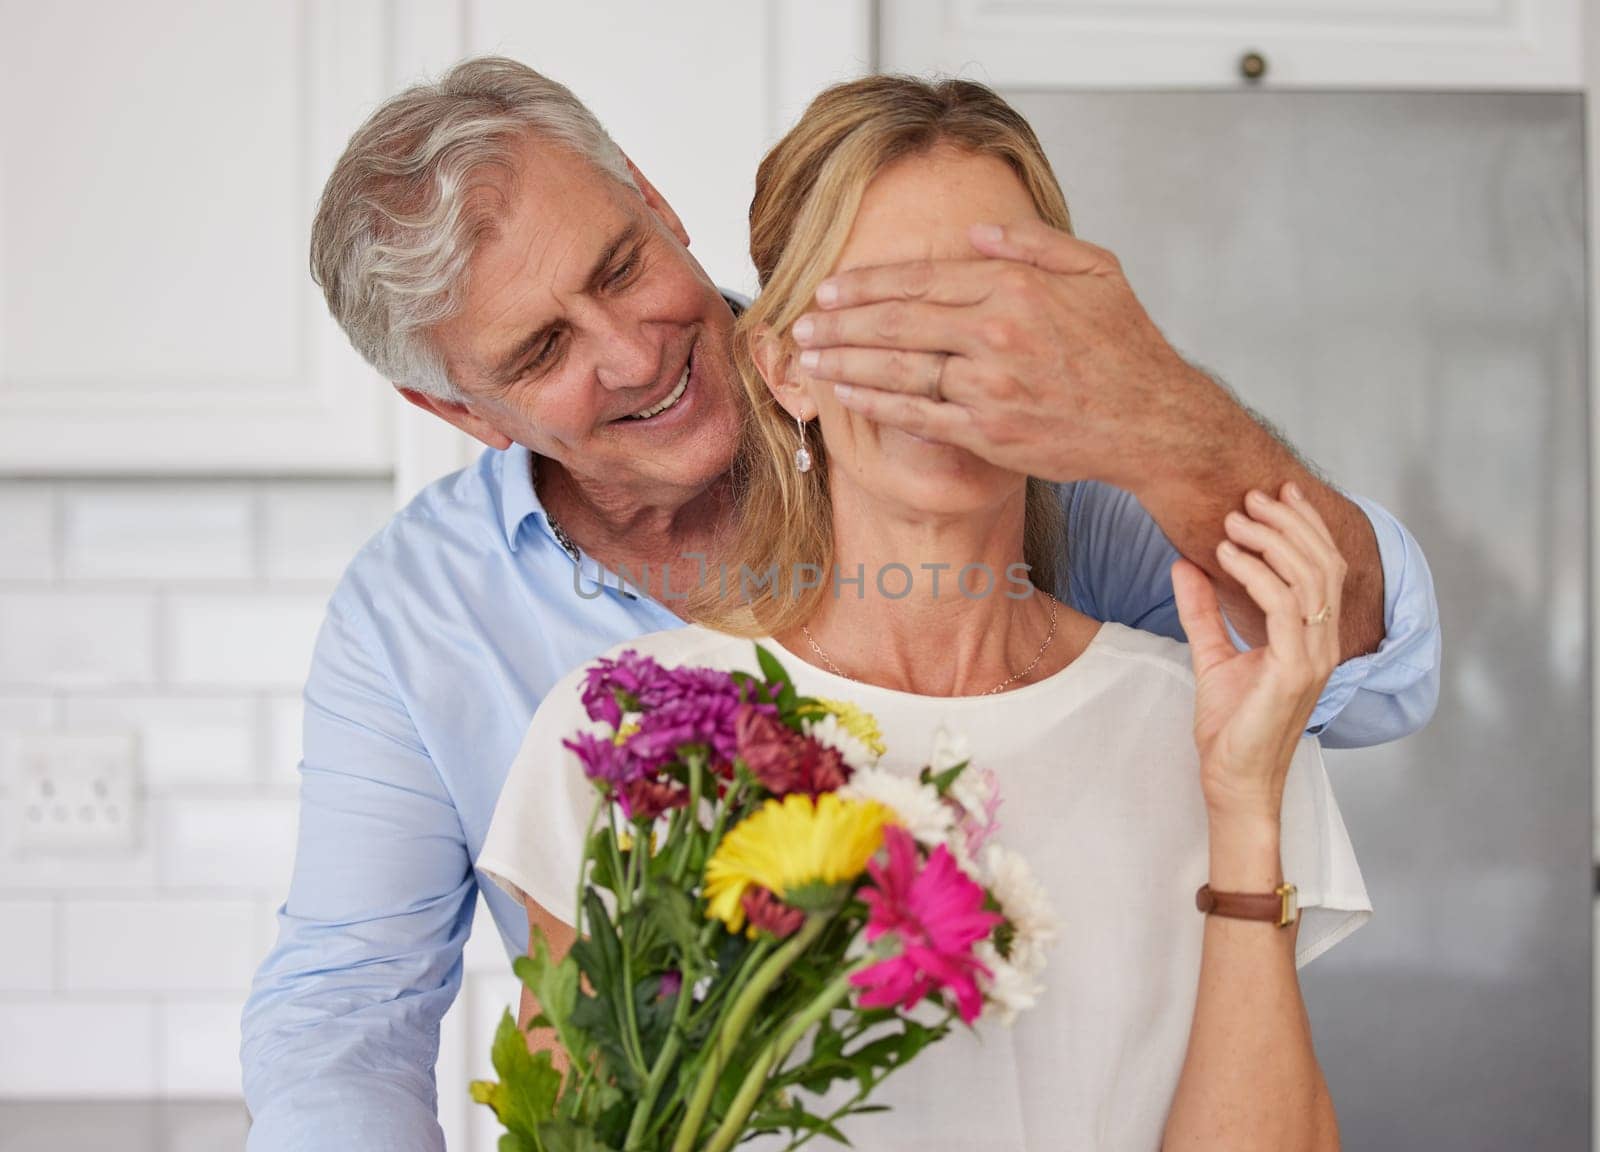 Senior couple covering eyes for flowers surprise, anniversary love and valentines day in New Zealand home. Happy man giving bouquet to woman for birthday gift, present and celebrate romance together by YuriArcurs